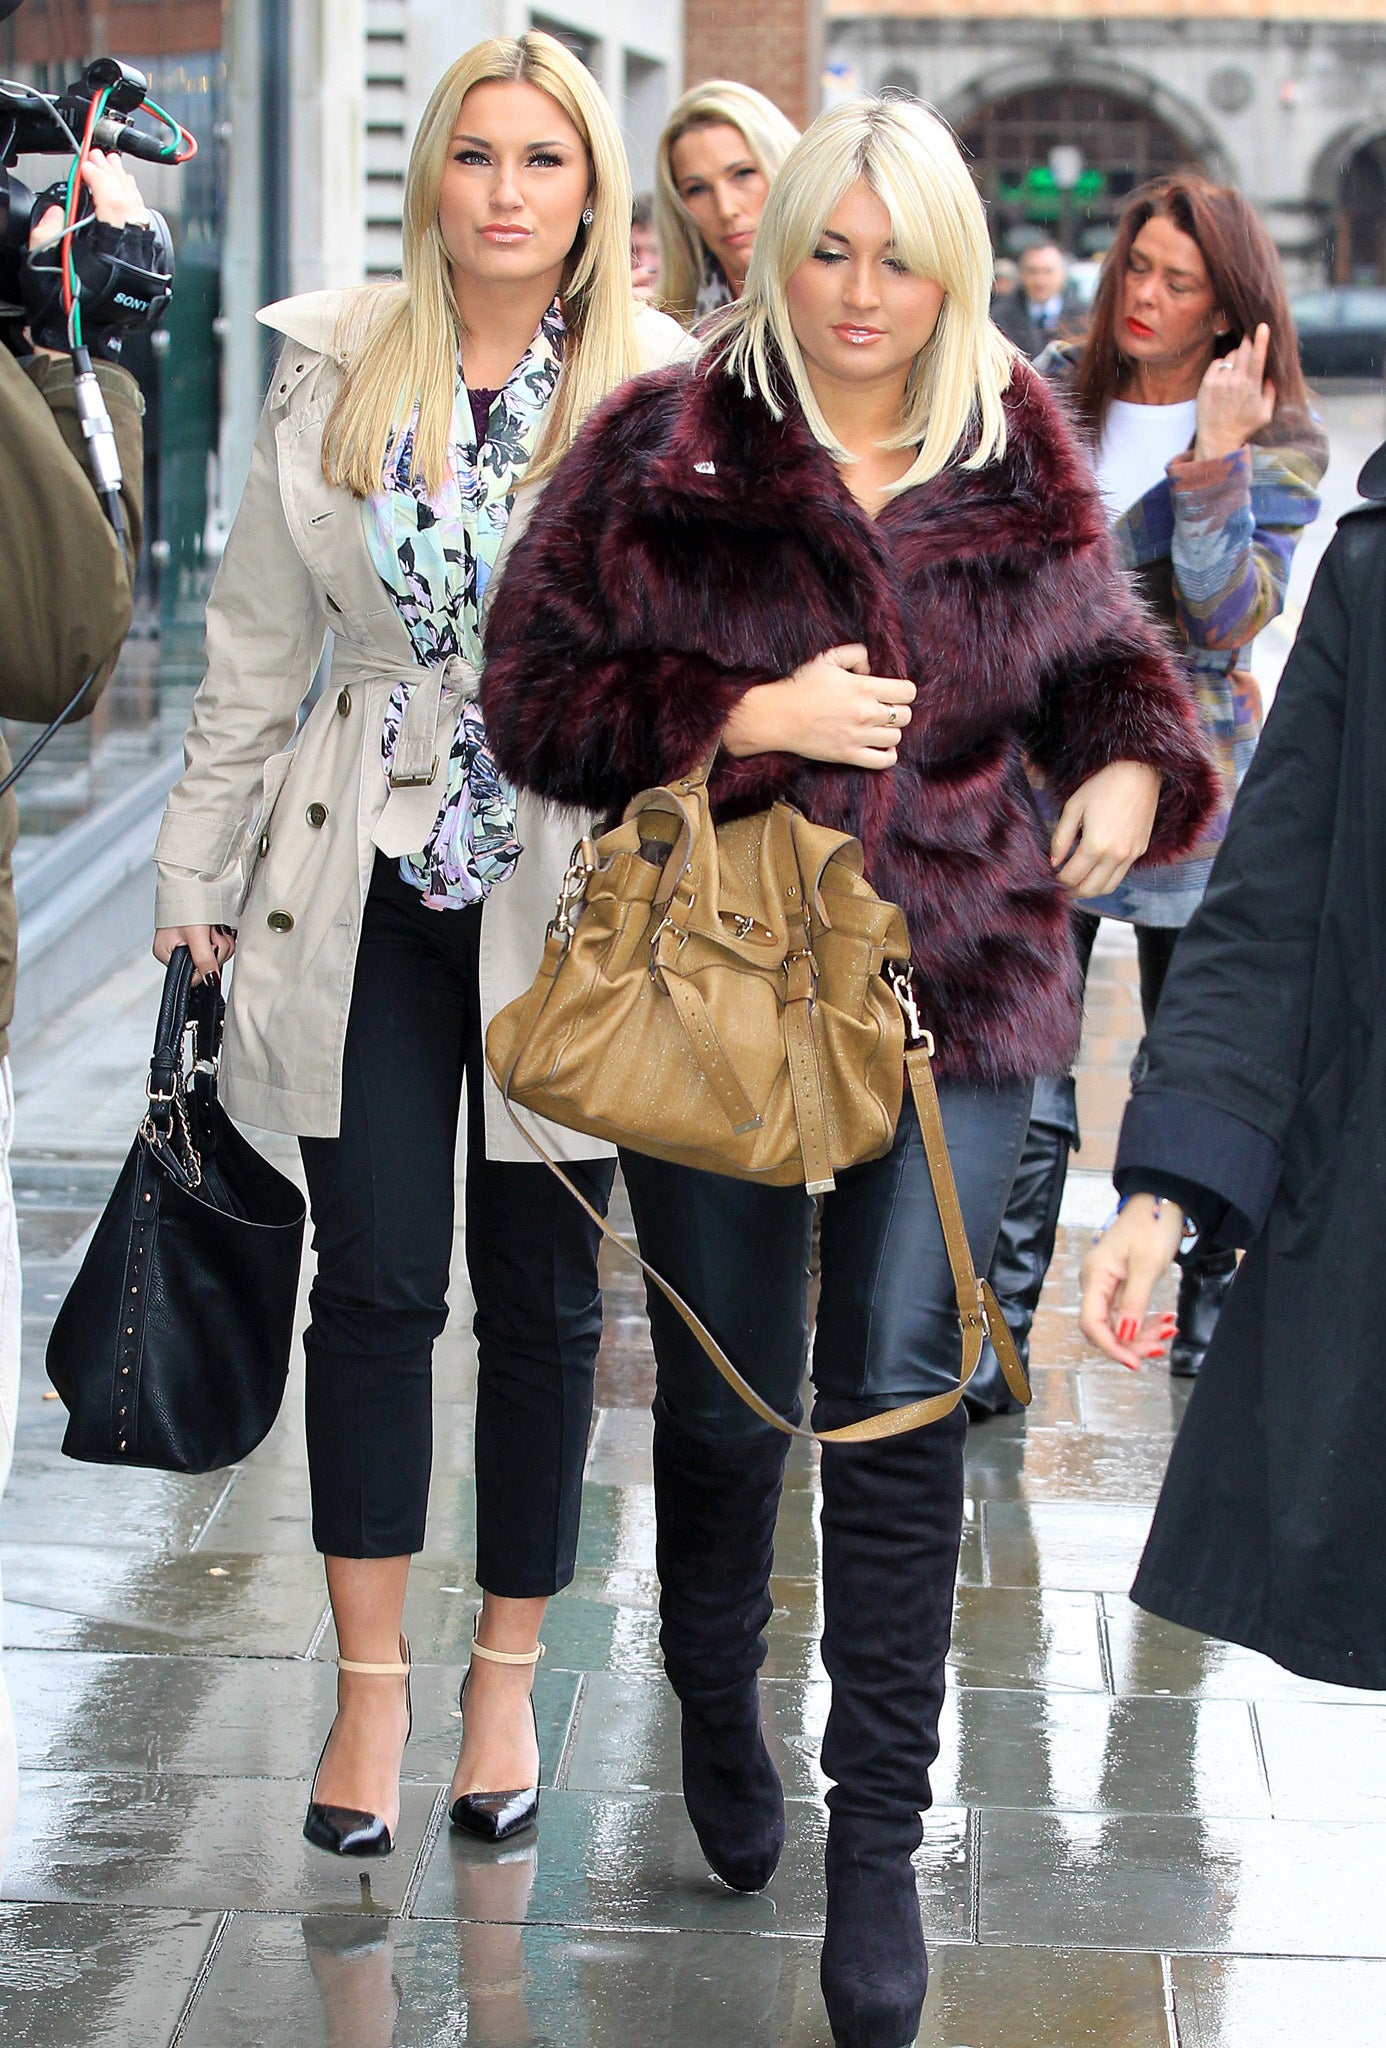 Sam and Billie Faiers outside the Old Bailey today